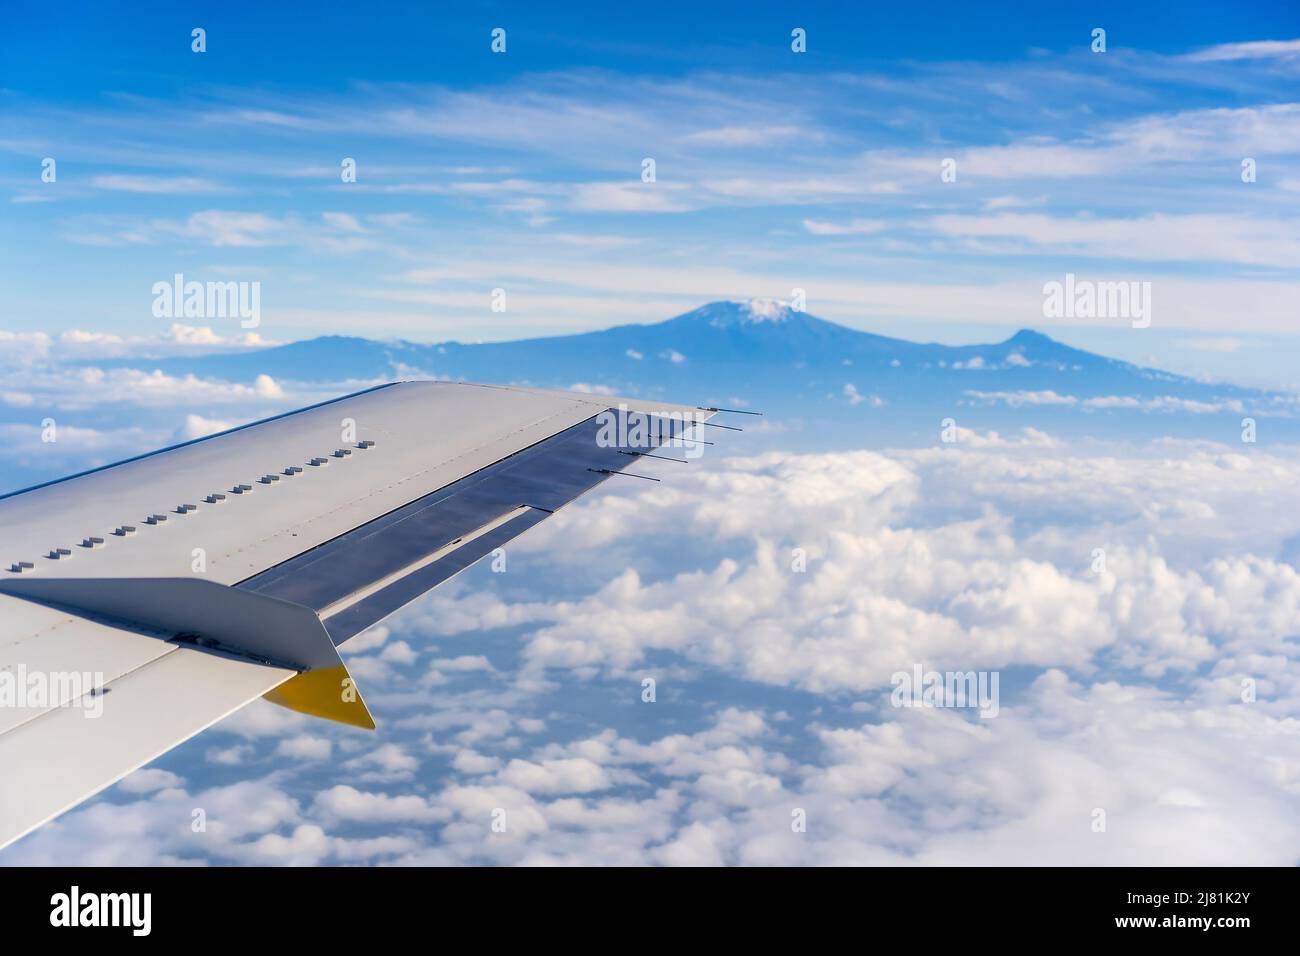 View from the airplane window of the Kilimanjaro volcano in the white clouds in Tanzania, East Africa Stock Photo